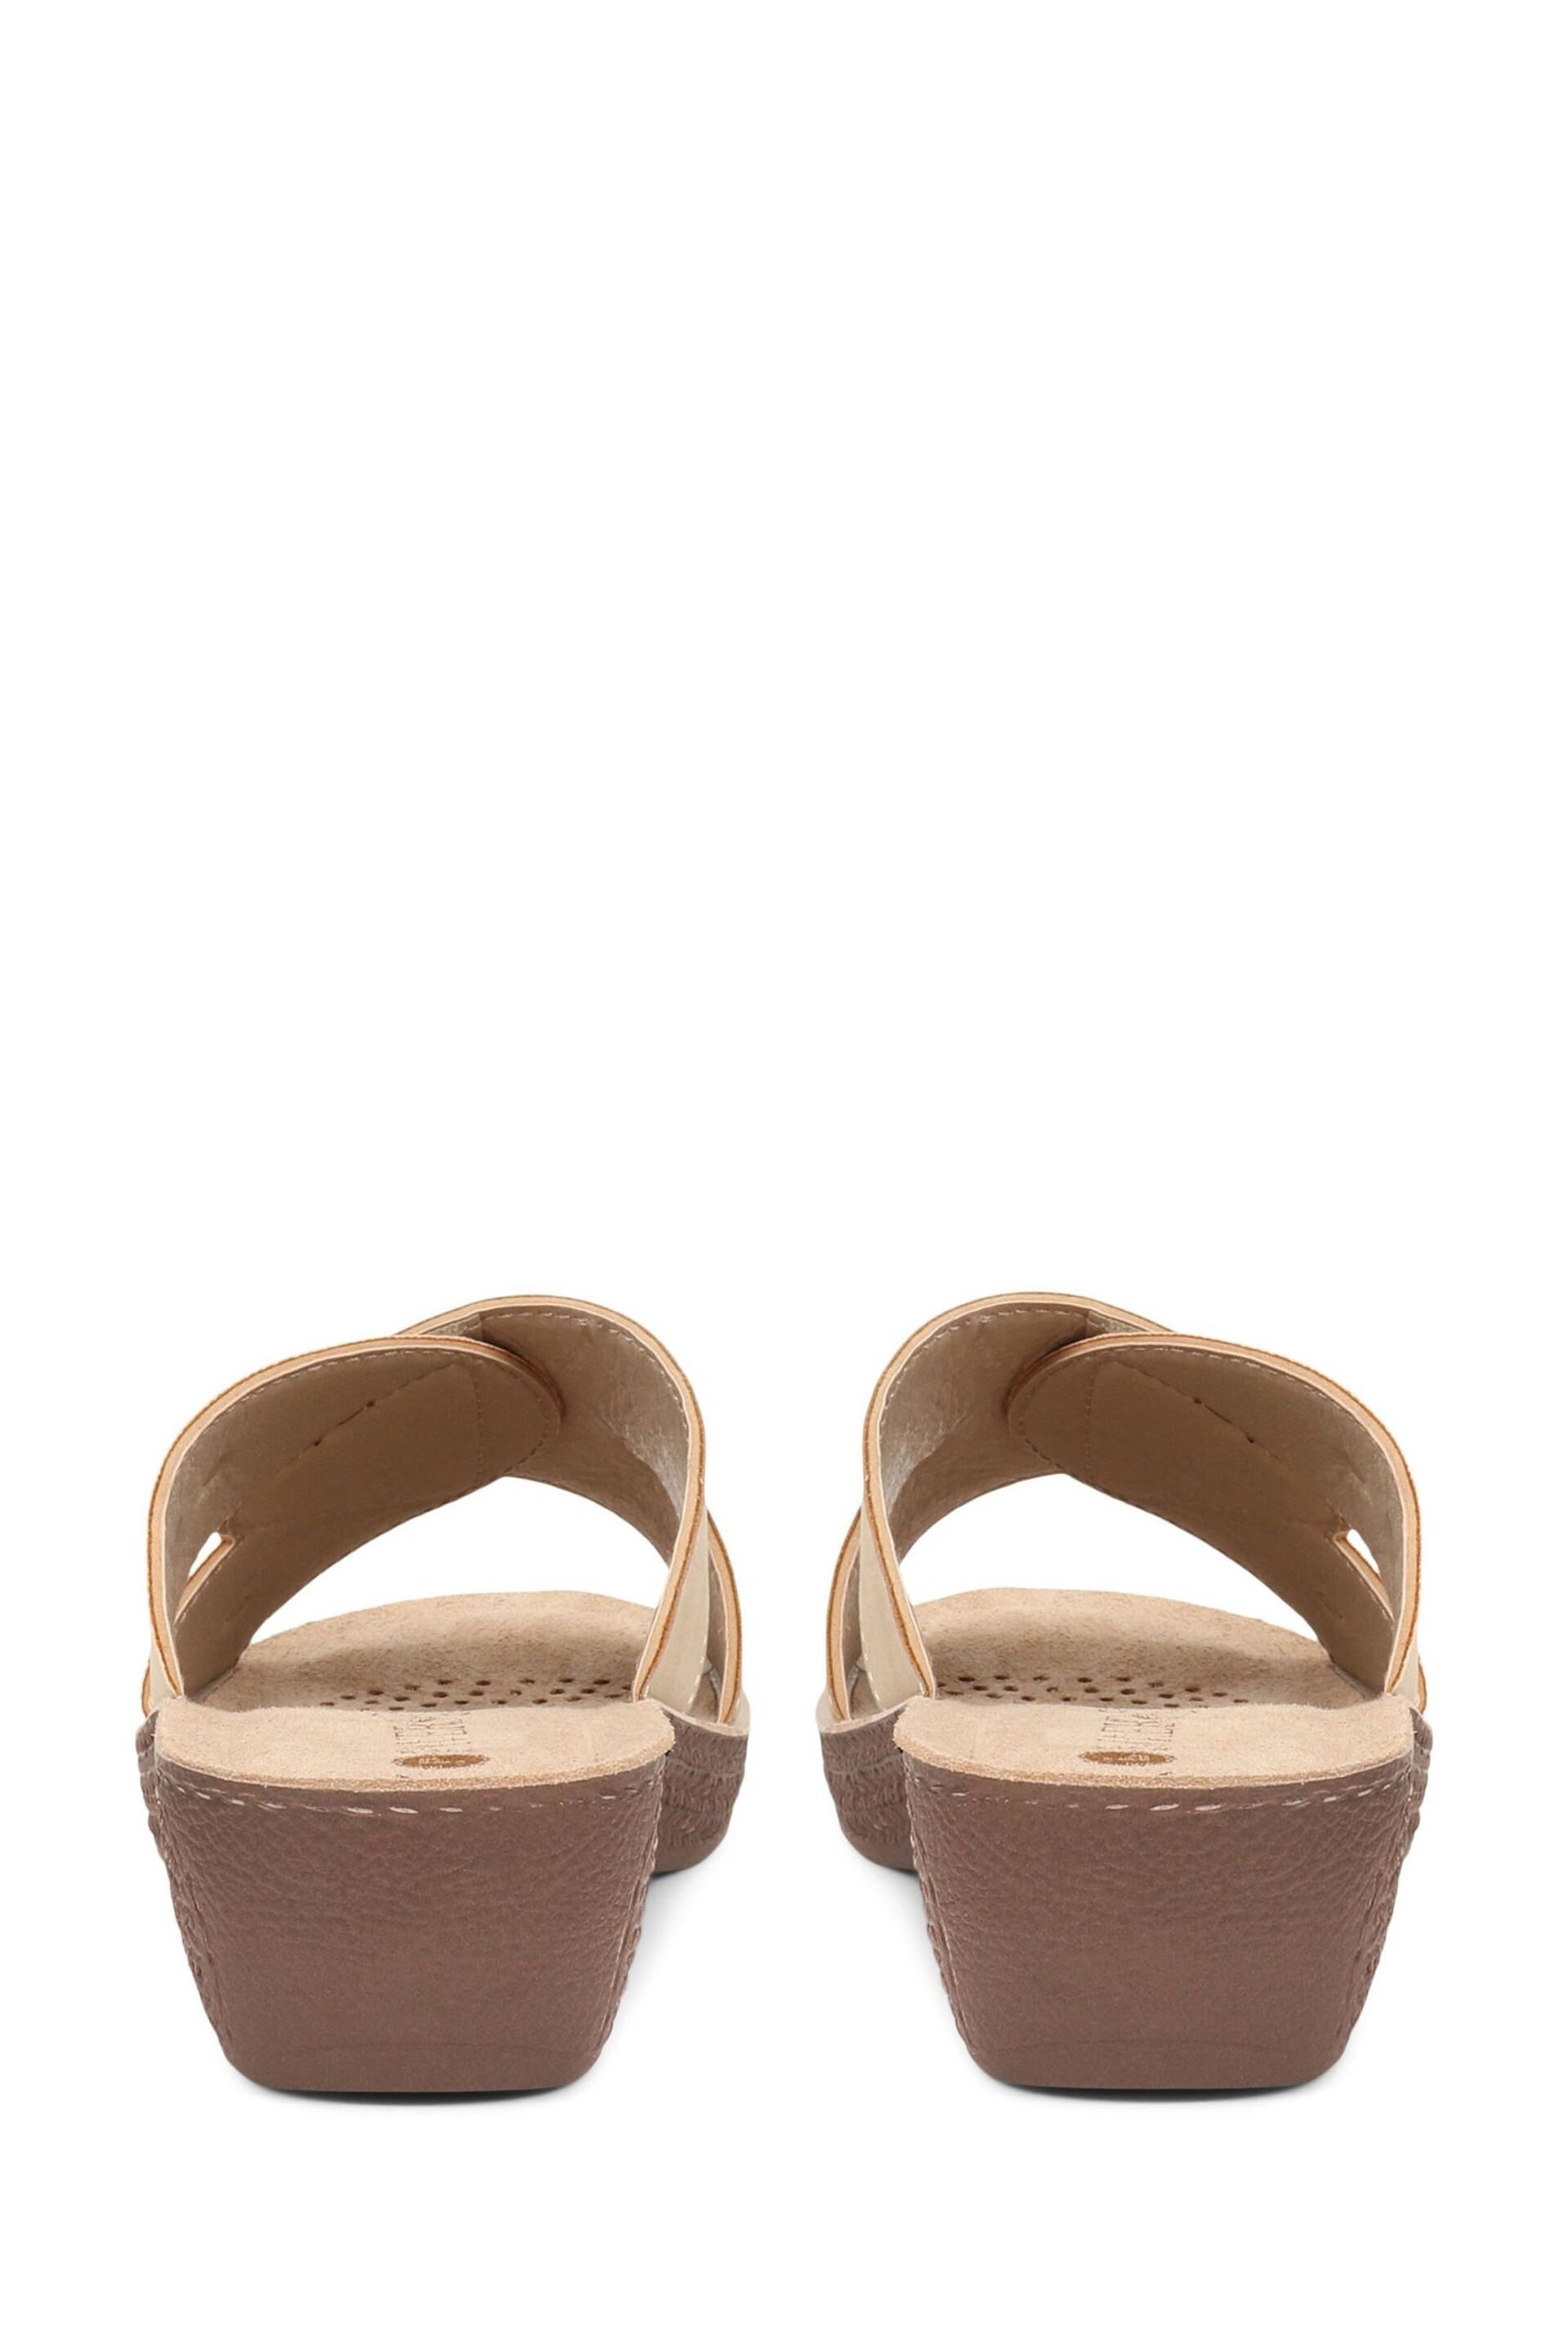 Pavers Comfortable Button Detail Sandals - Image 4 of 6